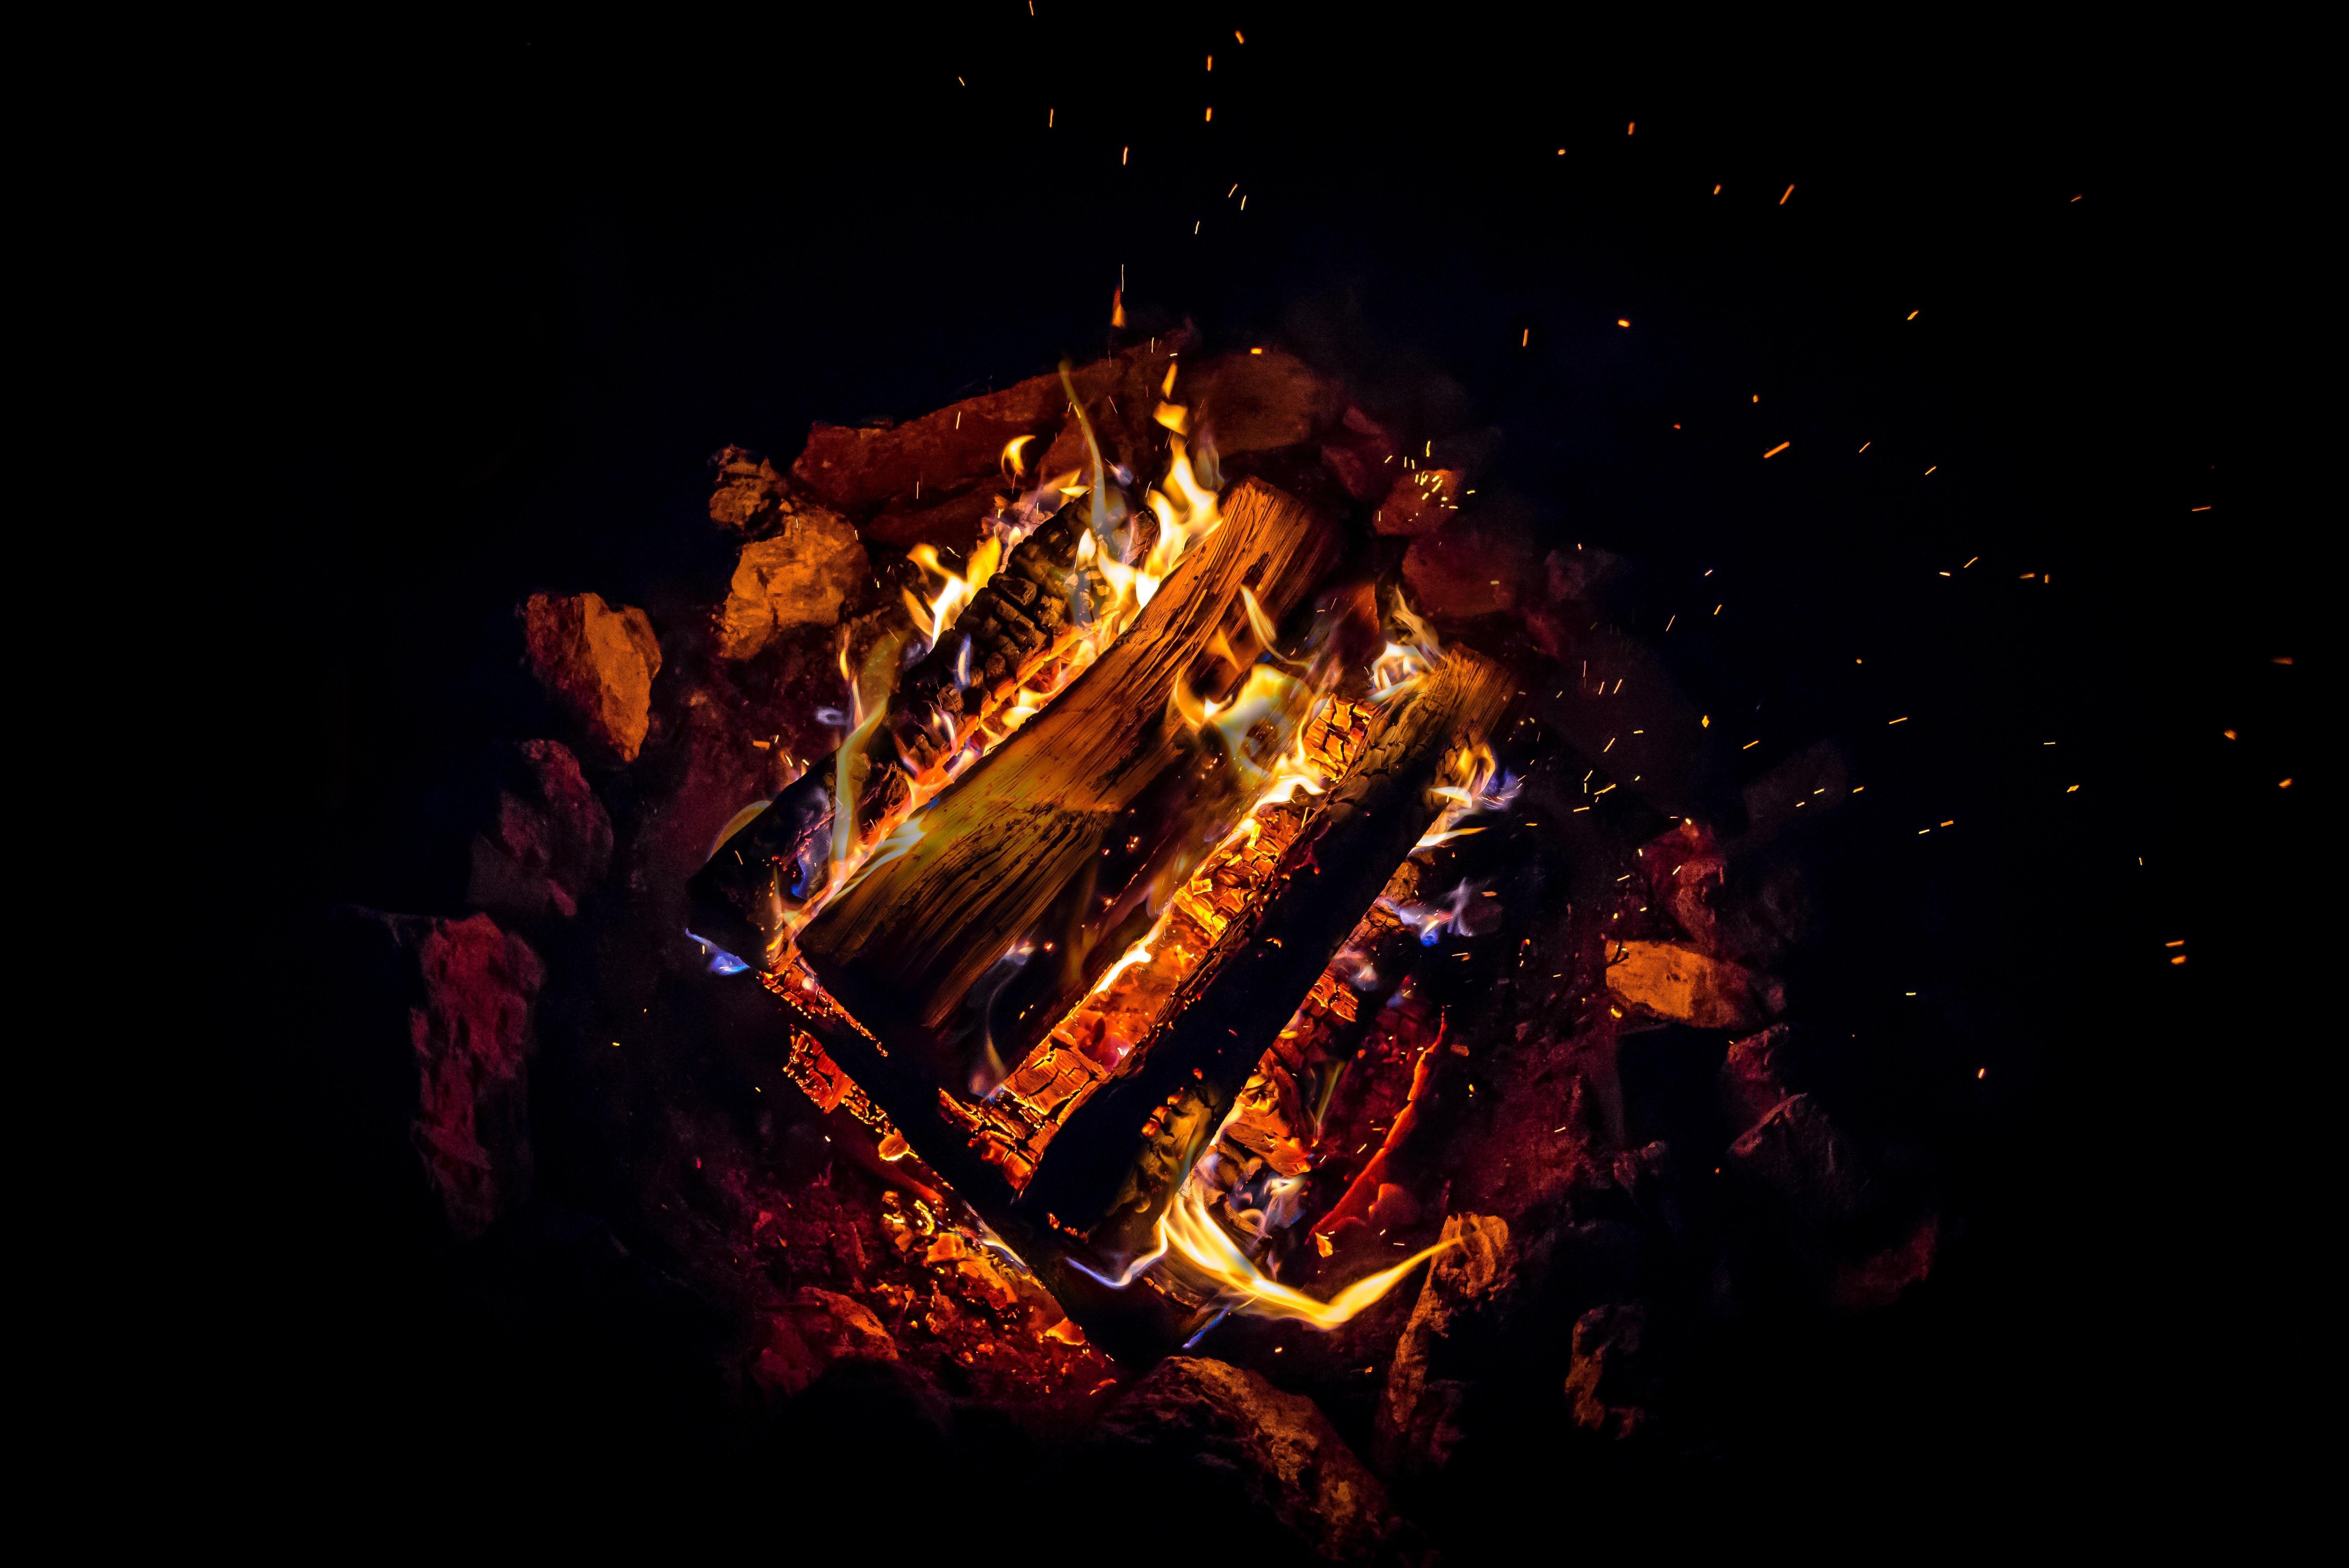 Embers Pictures  Download Free Images  Stock Photos on Unsplash